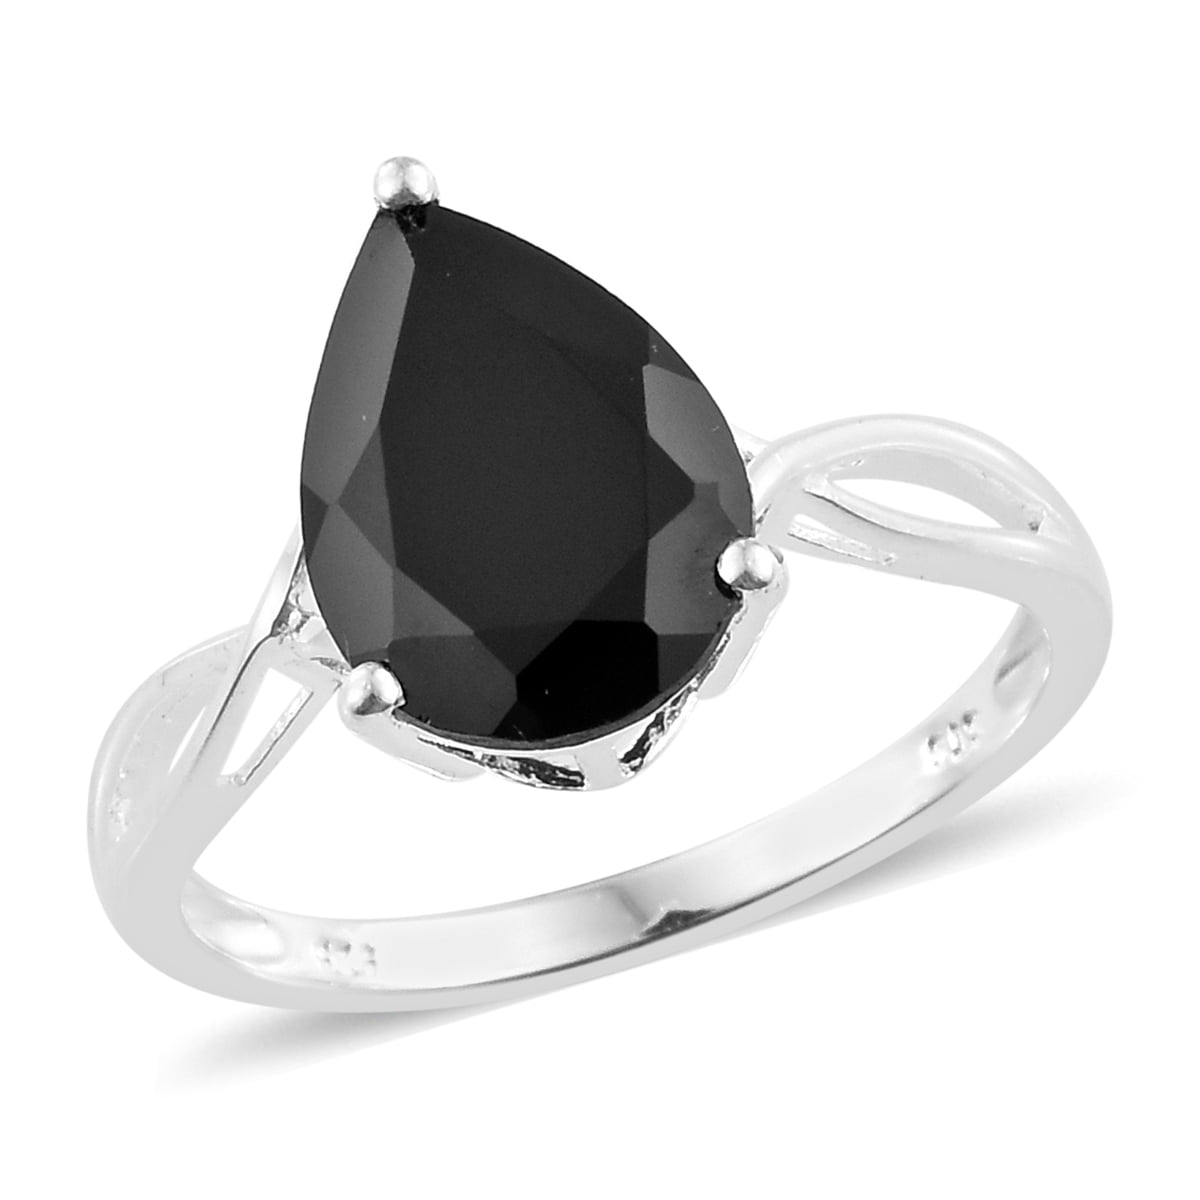 Natural black spinel ring pear cut twist ring sterling silver engagement ring for women